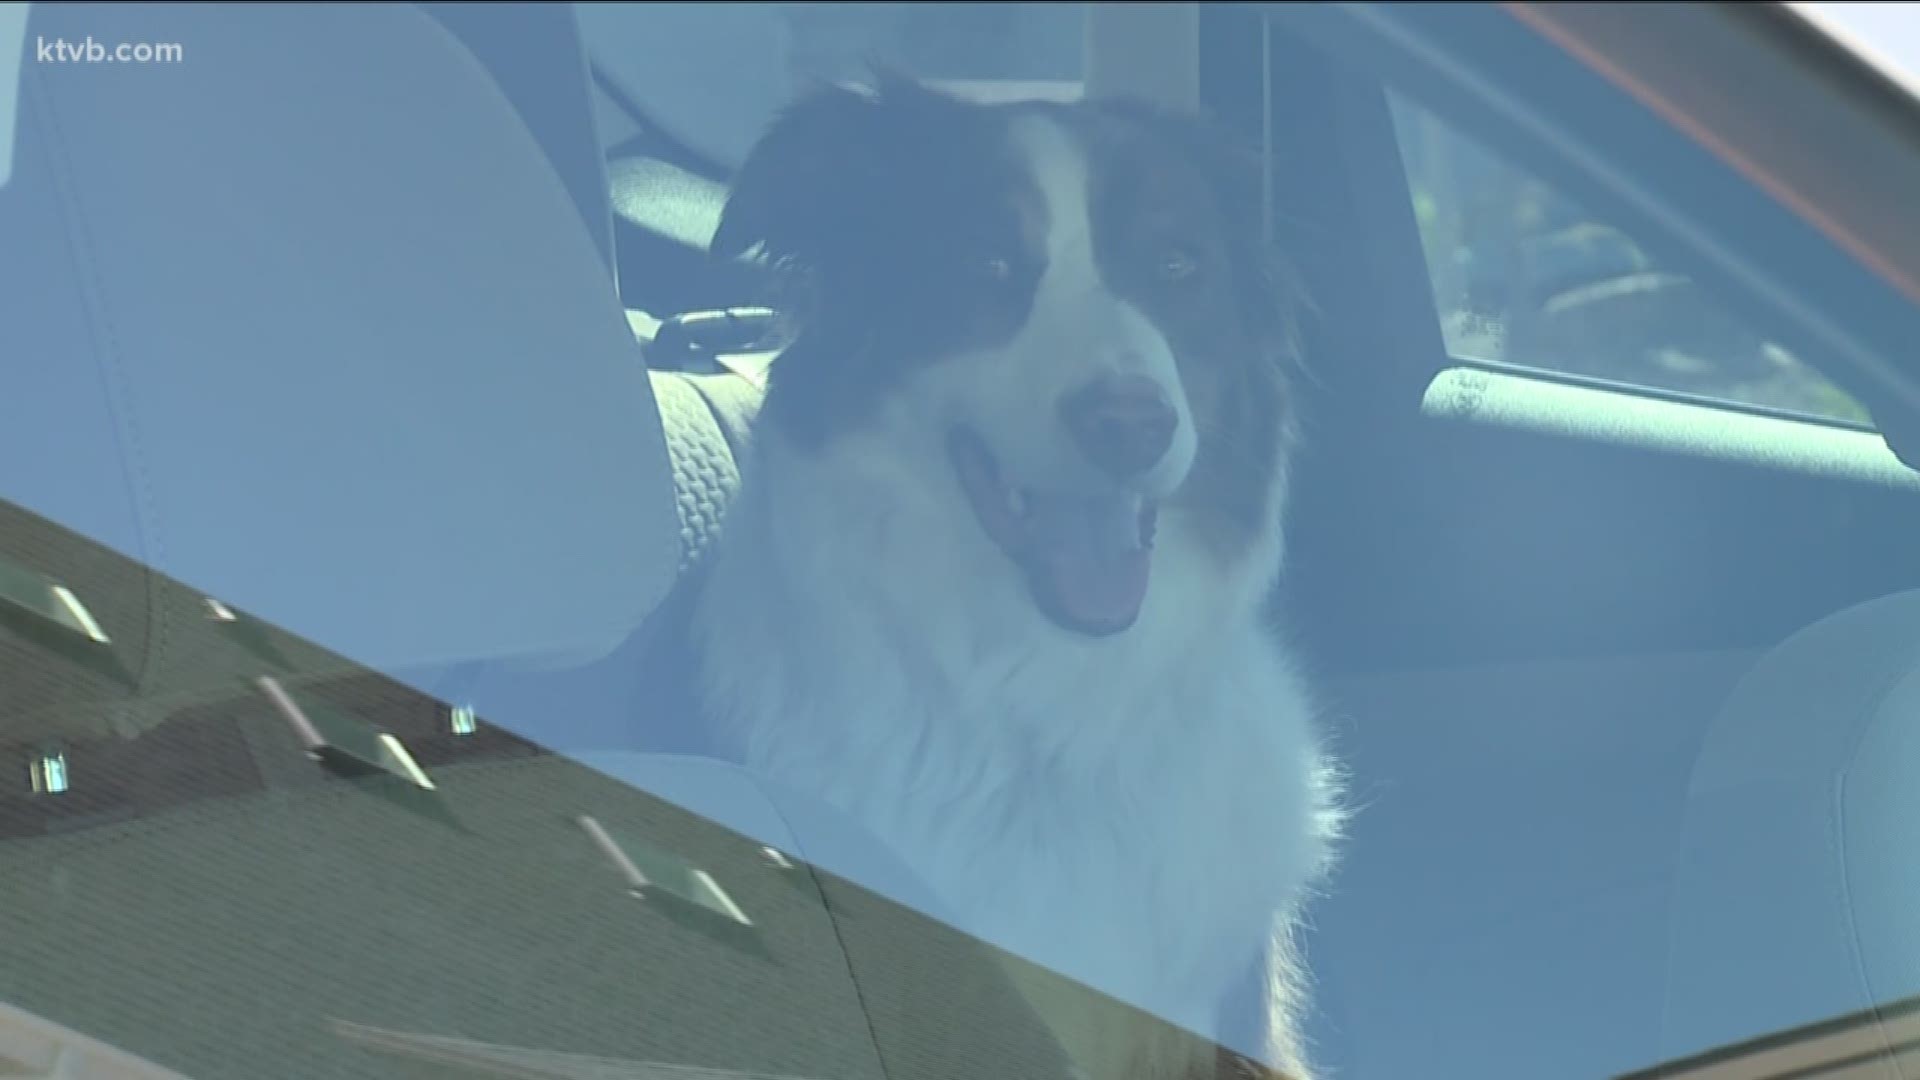 Leaving a pet in a hot car - even for a short time - can be dangerous.